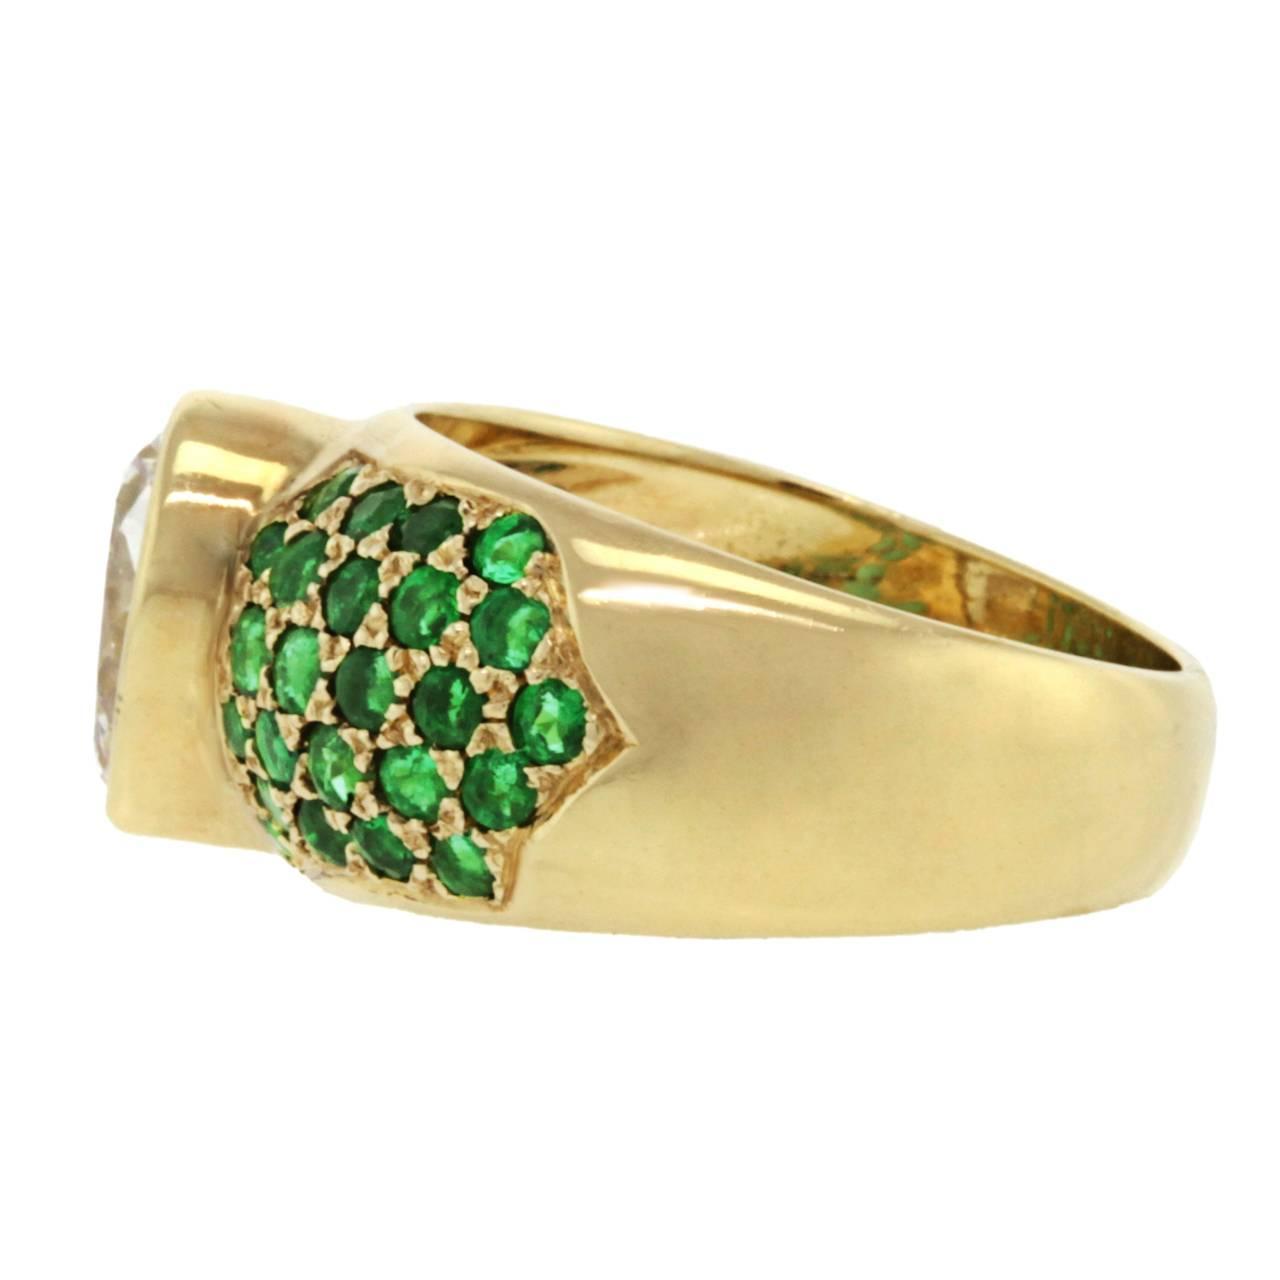 1970s London Chic 1.60 Carat Emerald Diamond Gold Ring For Sale at 1stdibs